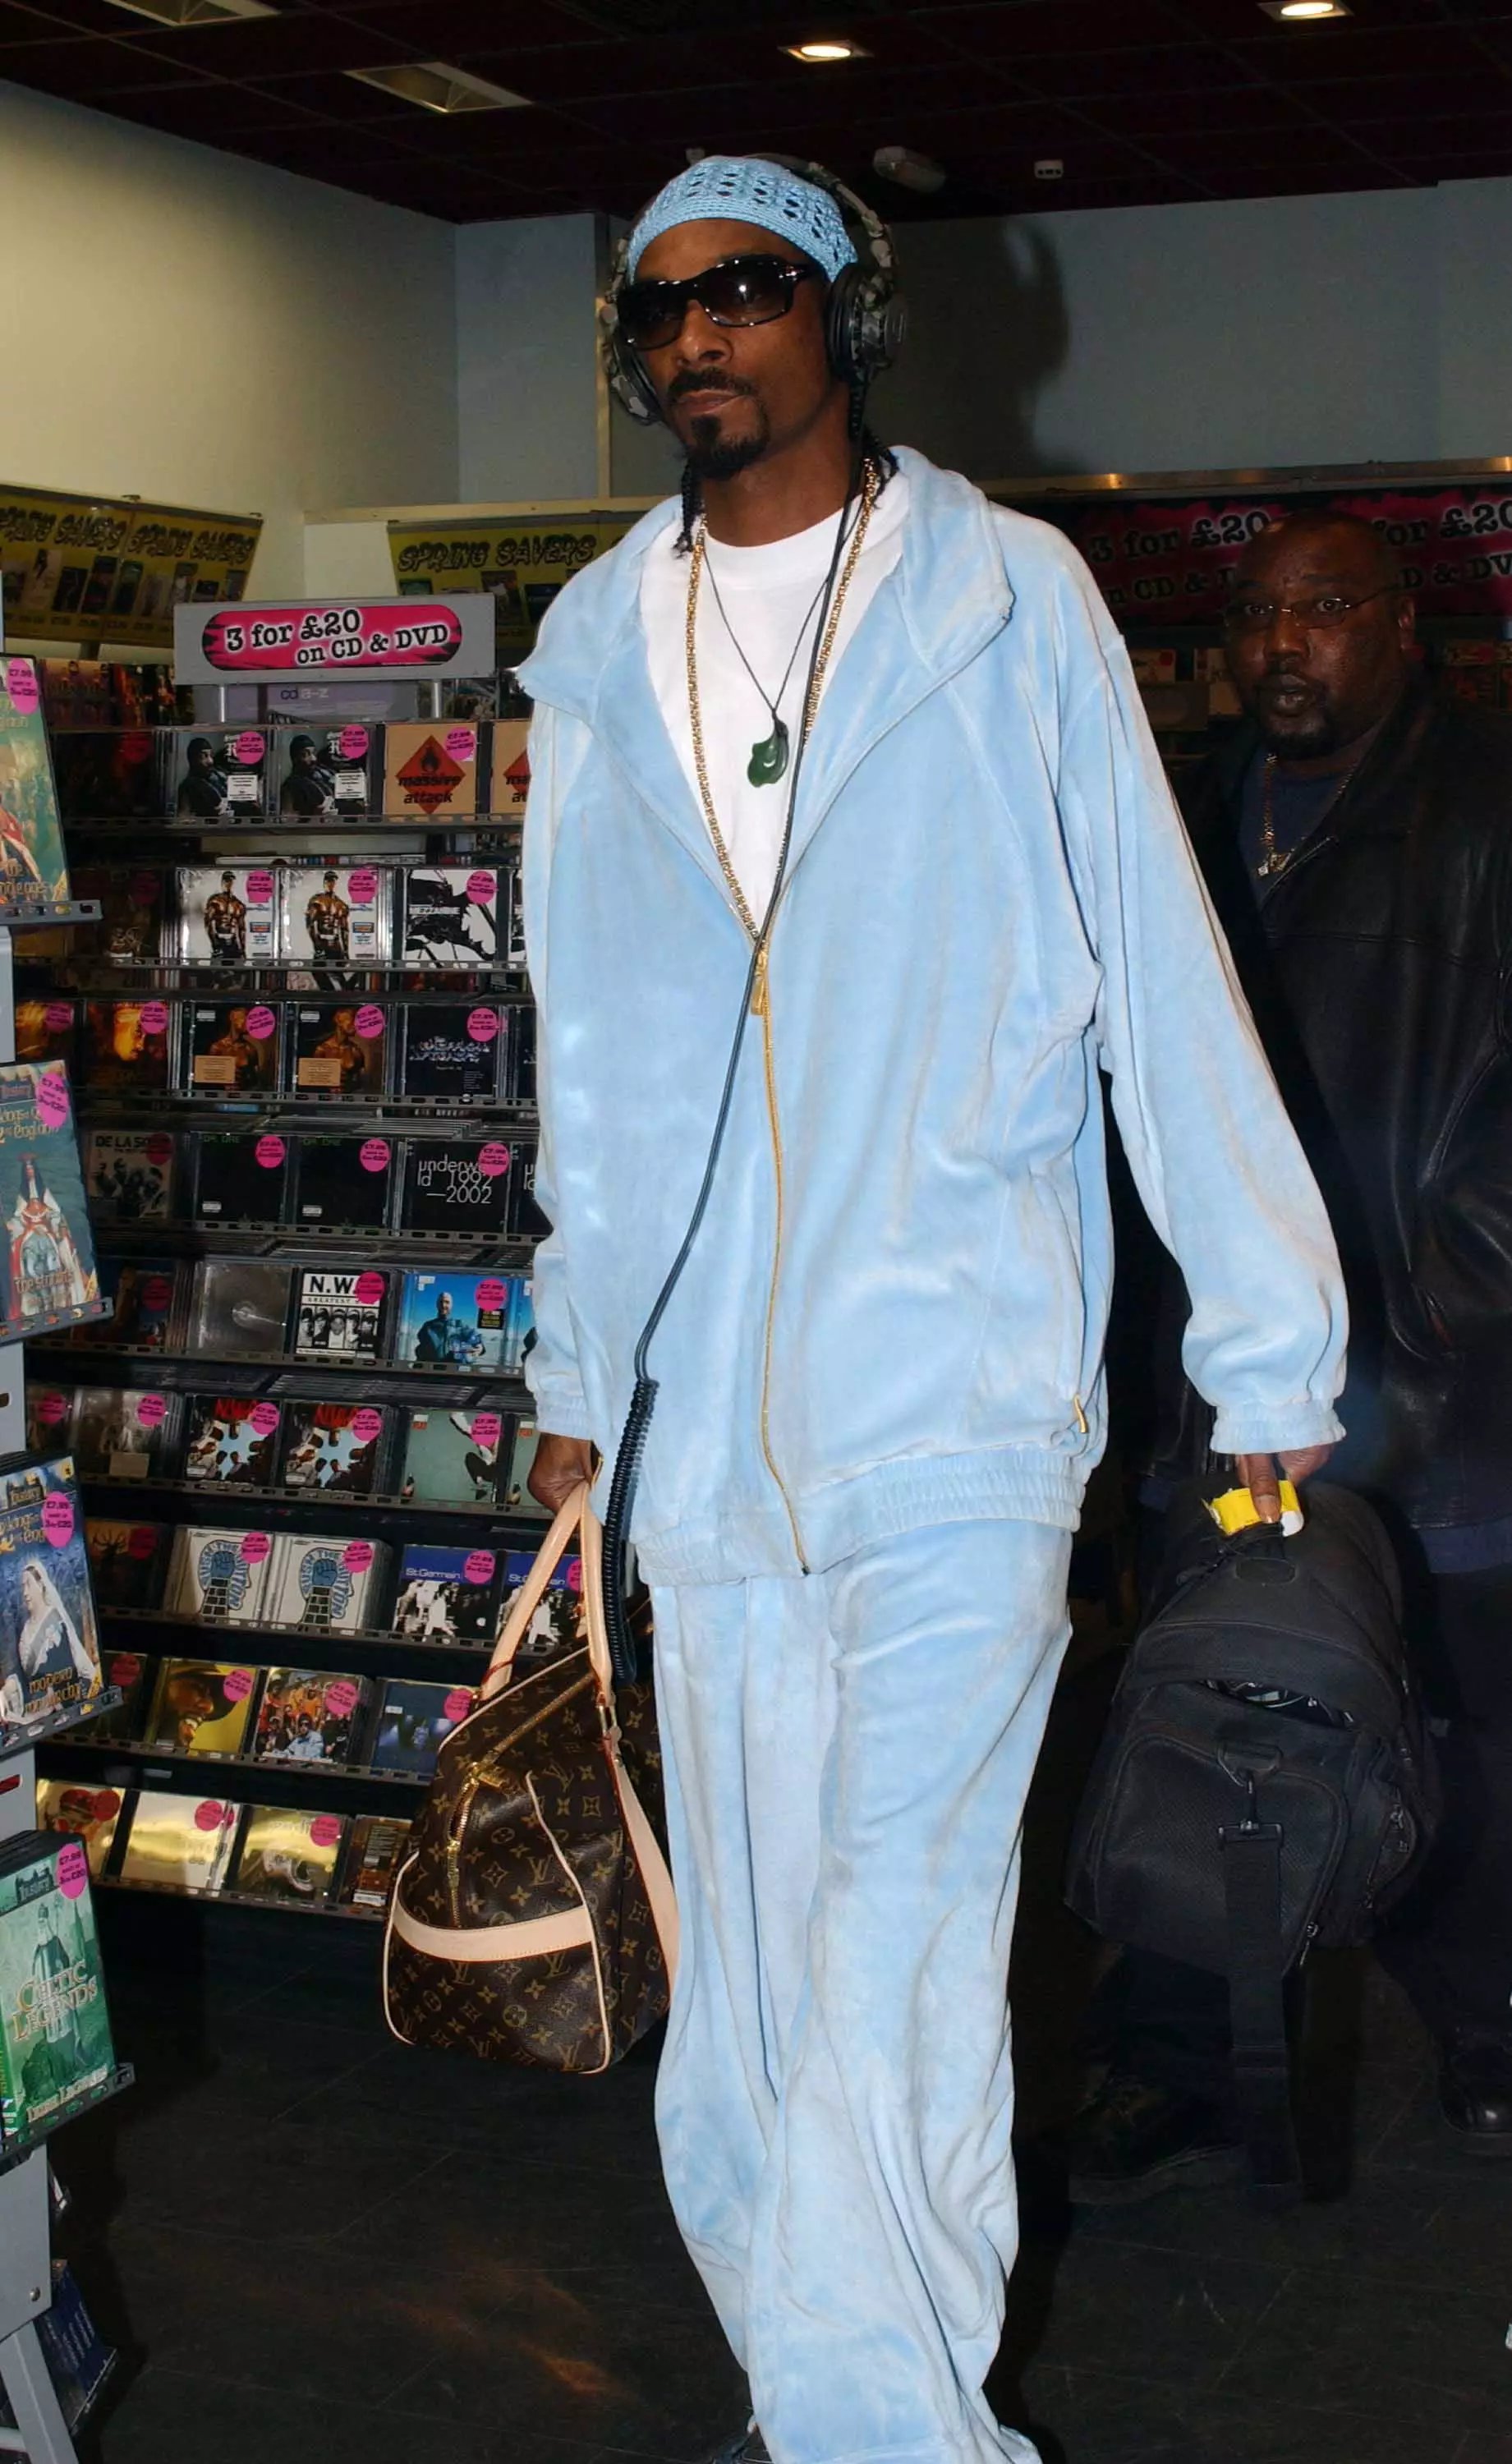 Snoop Dogg put on a DJ set in an Exeter nightclub, where he left behind a rucksack full of cash.